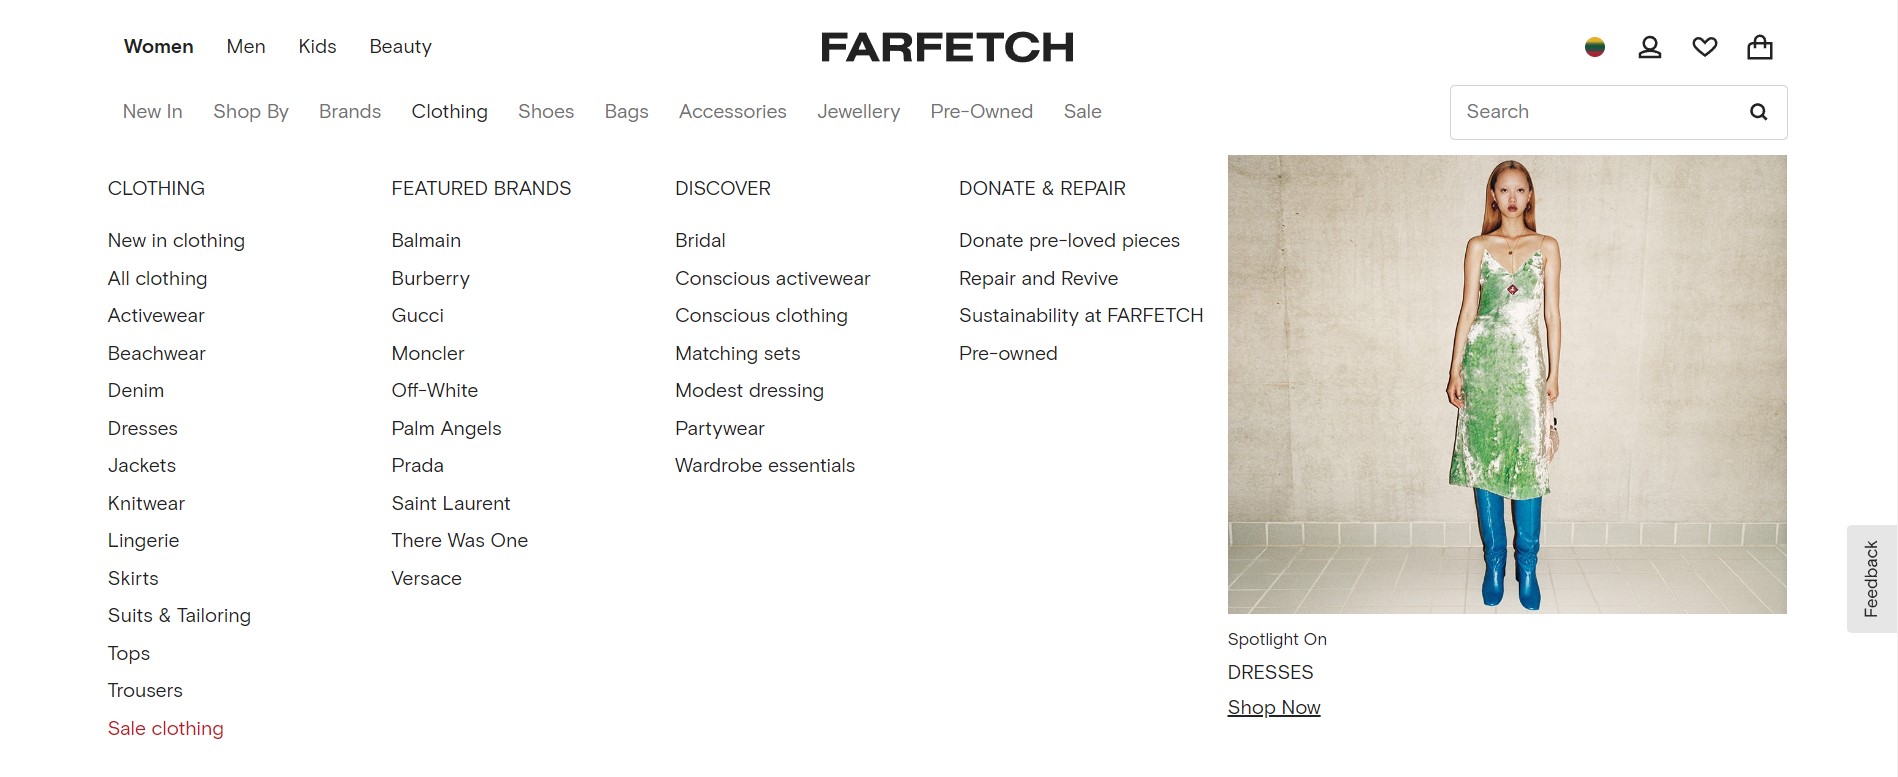 farfetch top navigation menu structure with secondary menu linking to subcategories